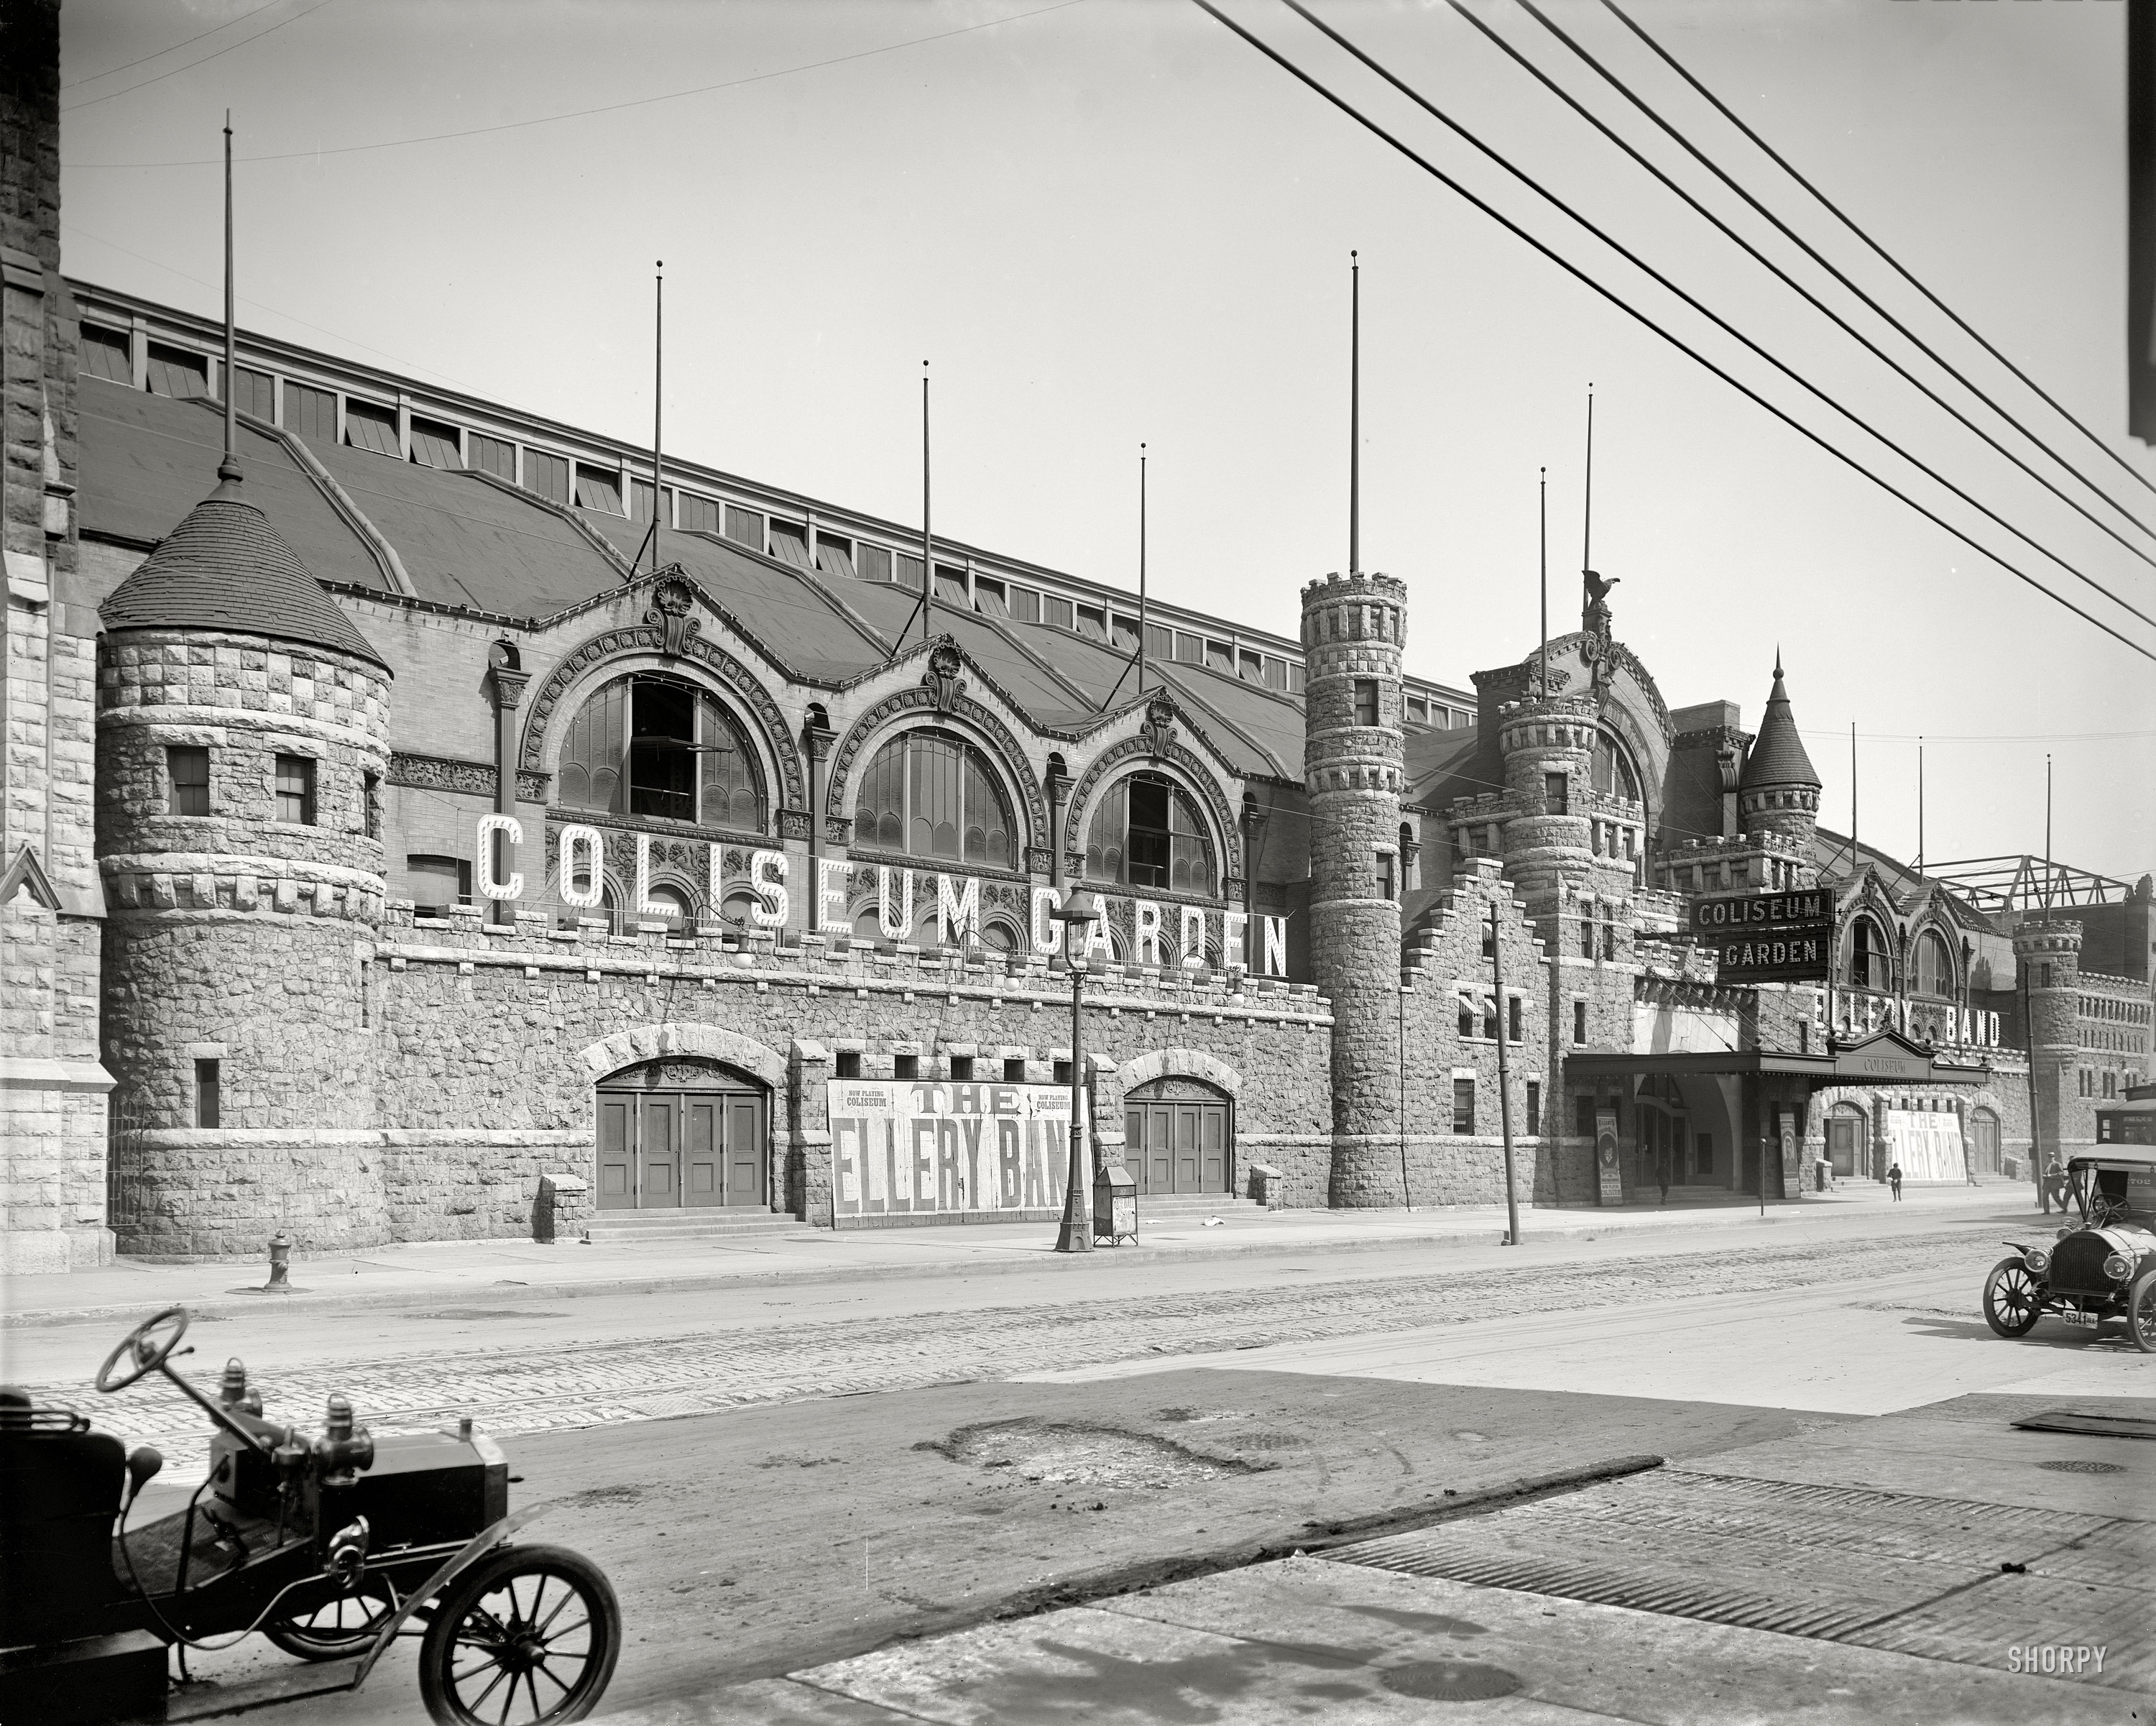 Chicago circa 1907. "The Coliseum, 15th & Wabash Avenue." 8x10 inch dry plate glass negative by Hans Behm, Detroit Publishing Company. View full size.